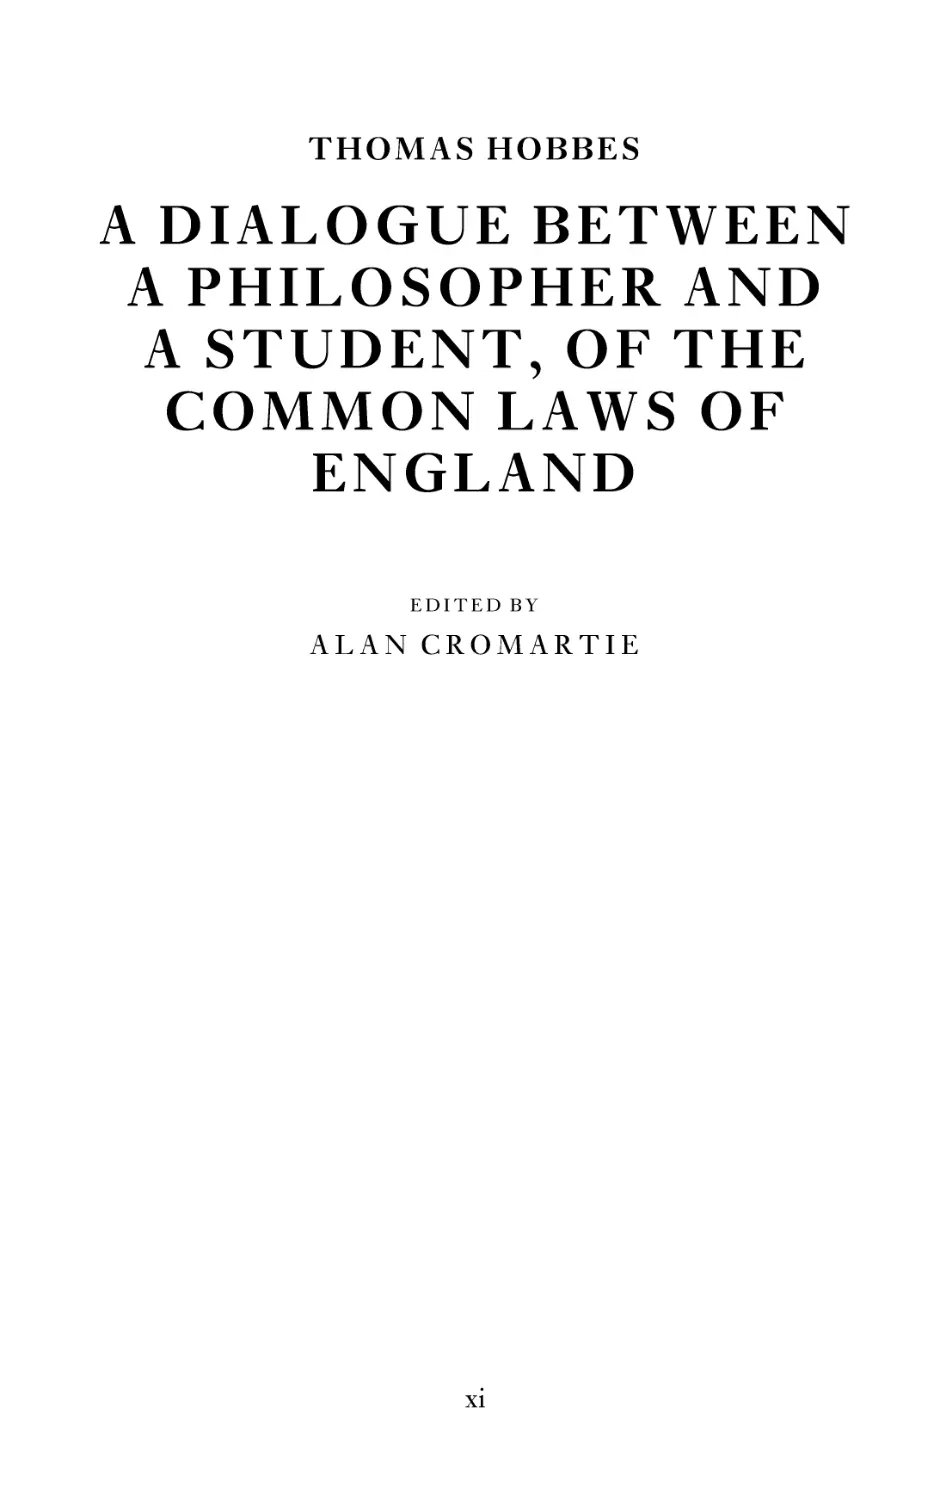 A DIALOGUE BETWEEN A PHILOSOPHER AND A STUDENT, OF THE COMMON LAWS OF ENGLAND